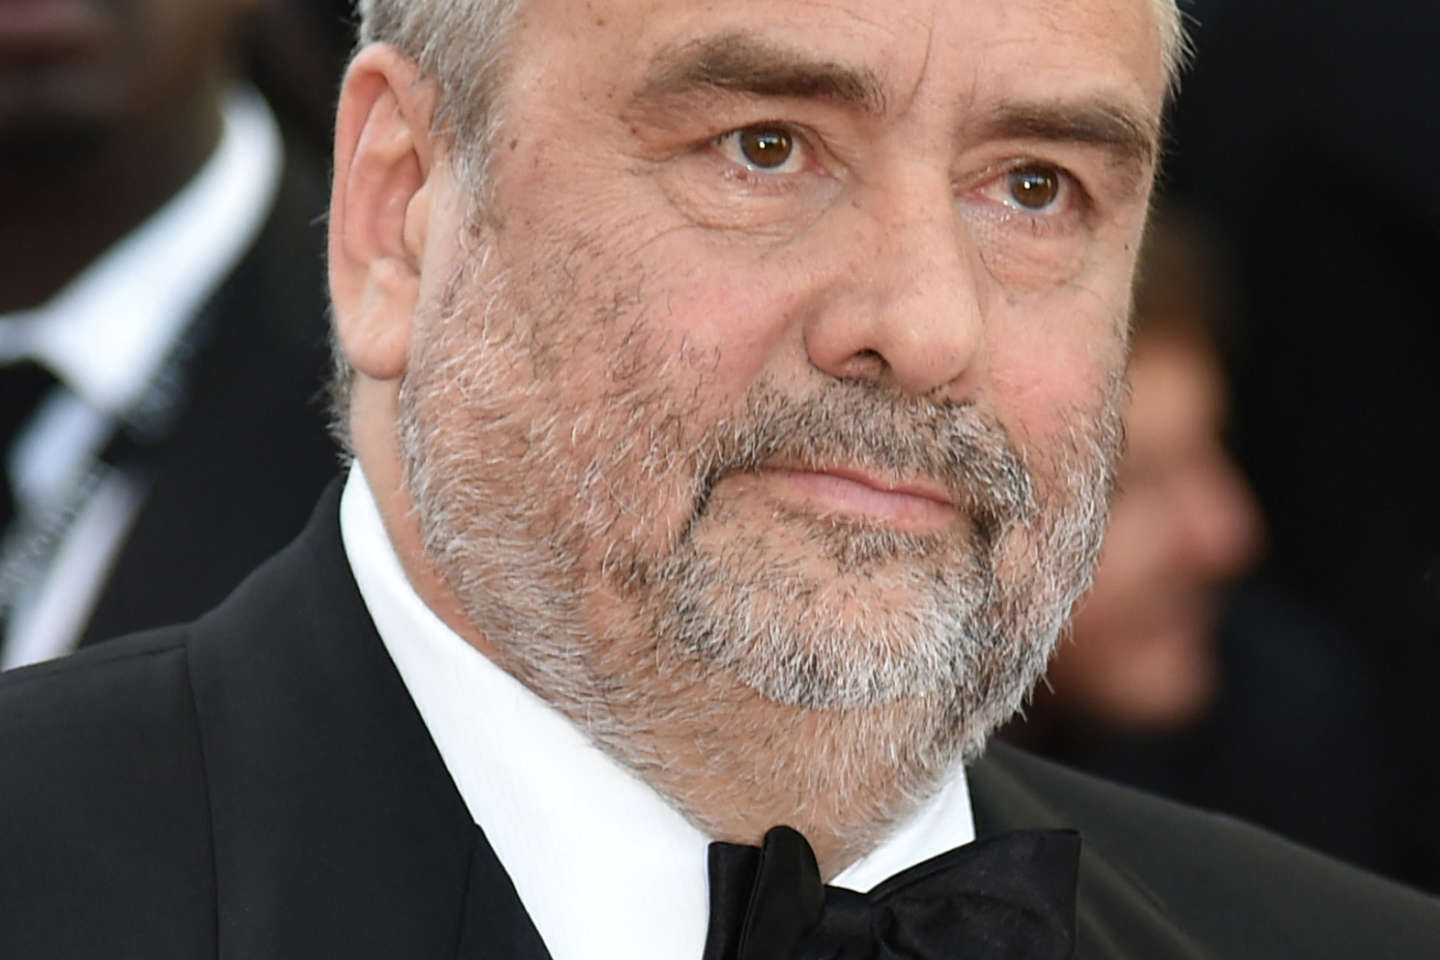 Luc Besson accused of rape: the Court of Cassation definitively dismisses the accusations of actress Sand Van Roy